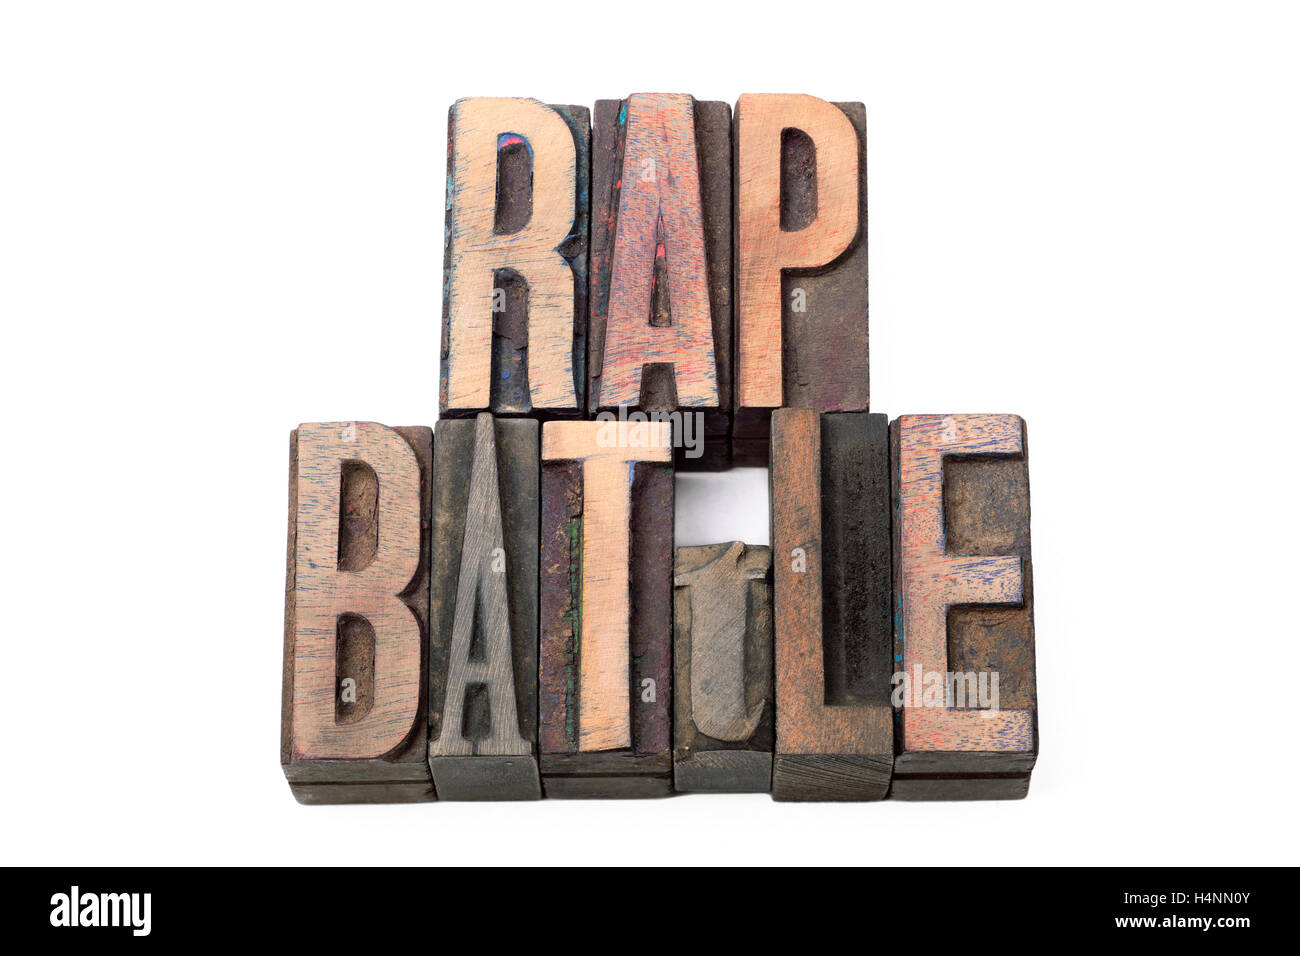 rap battle phrase made from vintage wooden letterpress type isolated on white Stock Photo